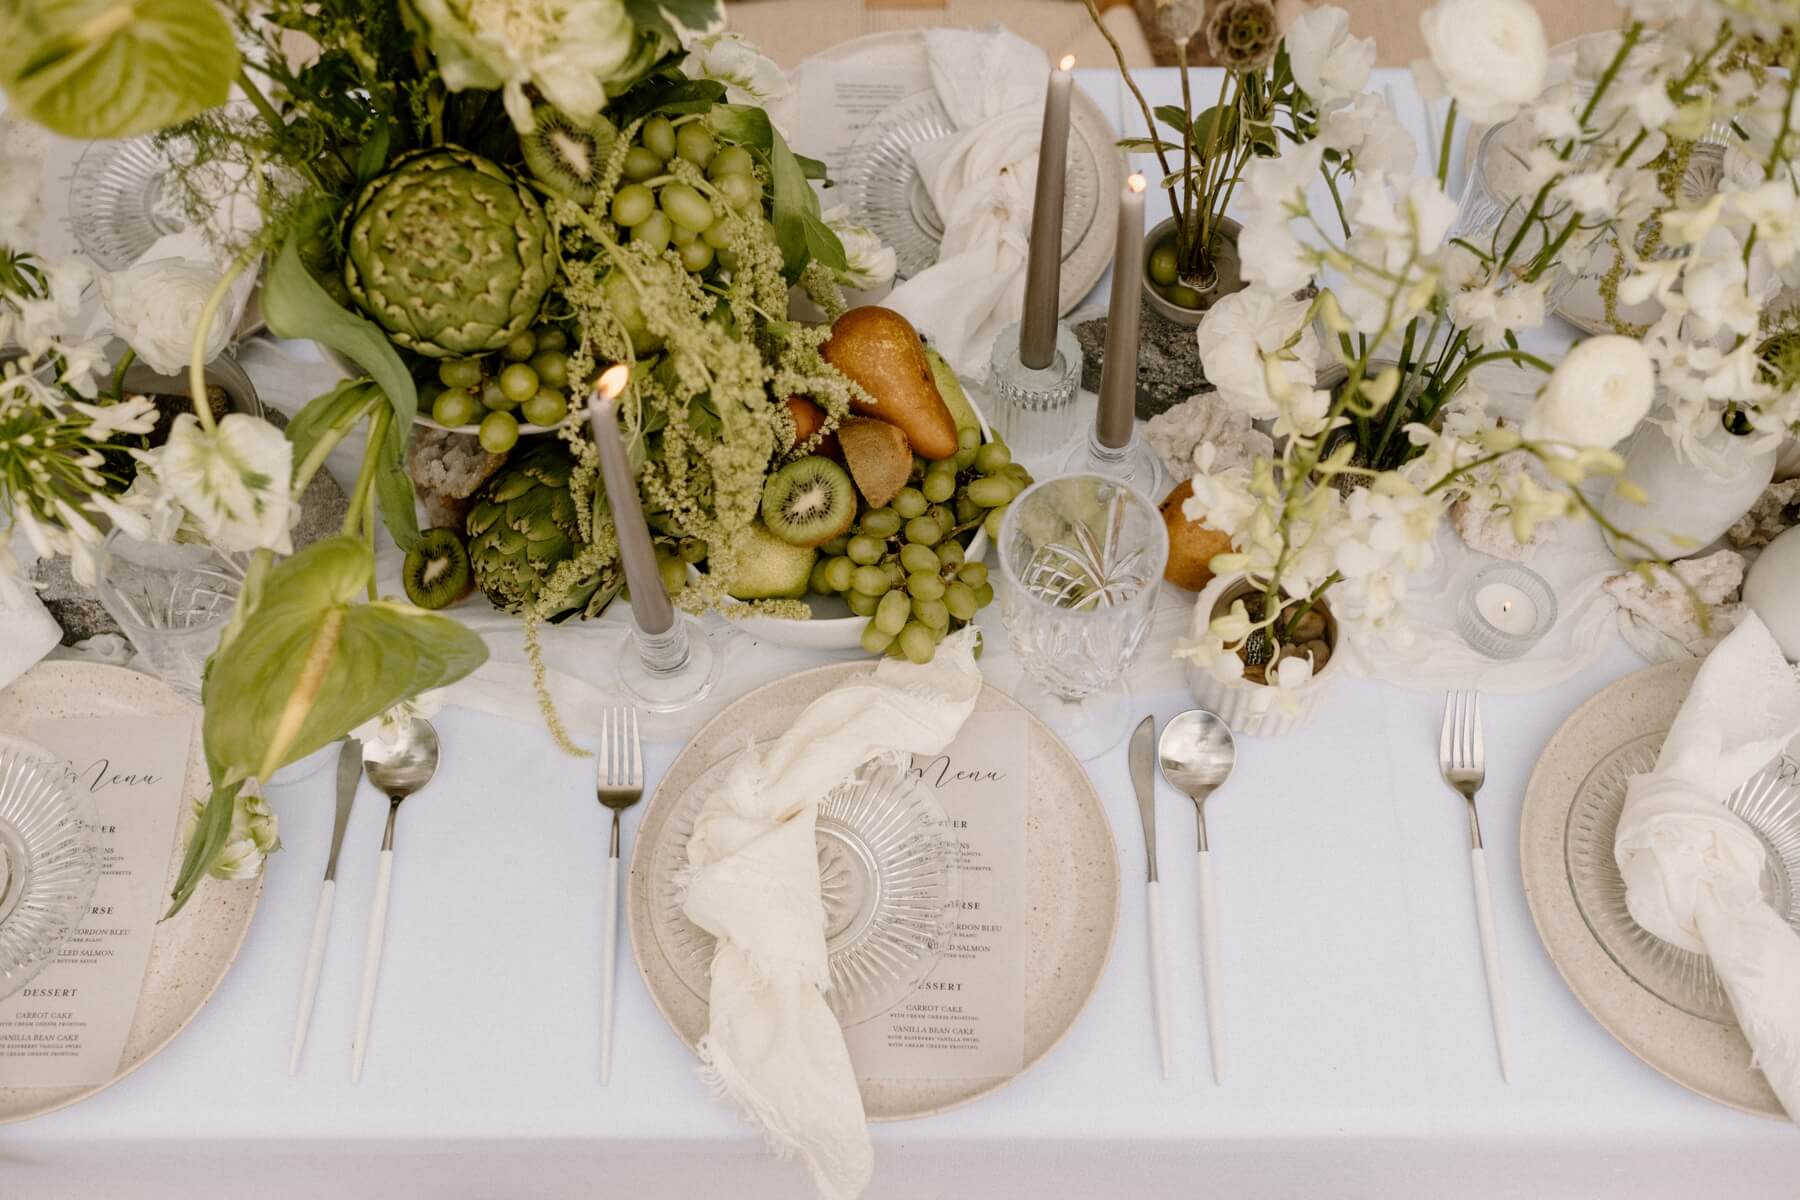 Round stone colored plates with menus, cream napkins, and green and white florals with fruit